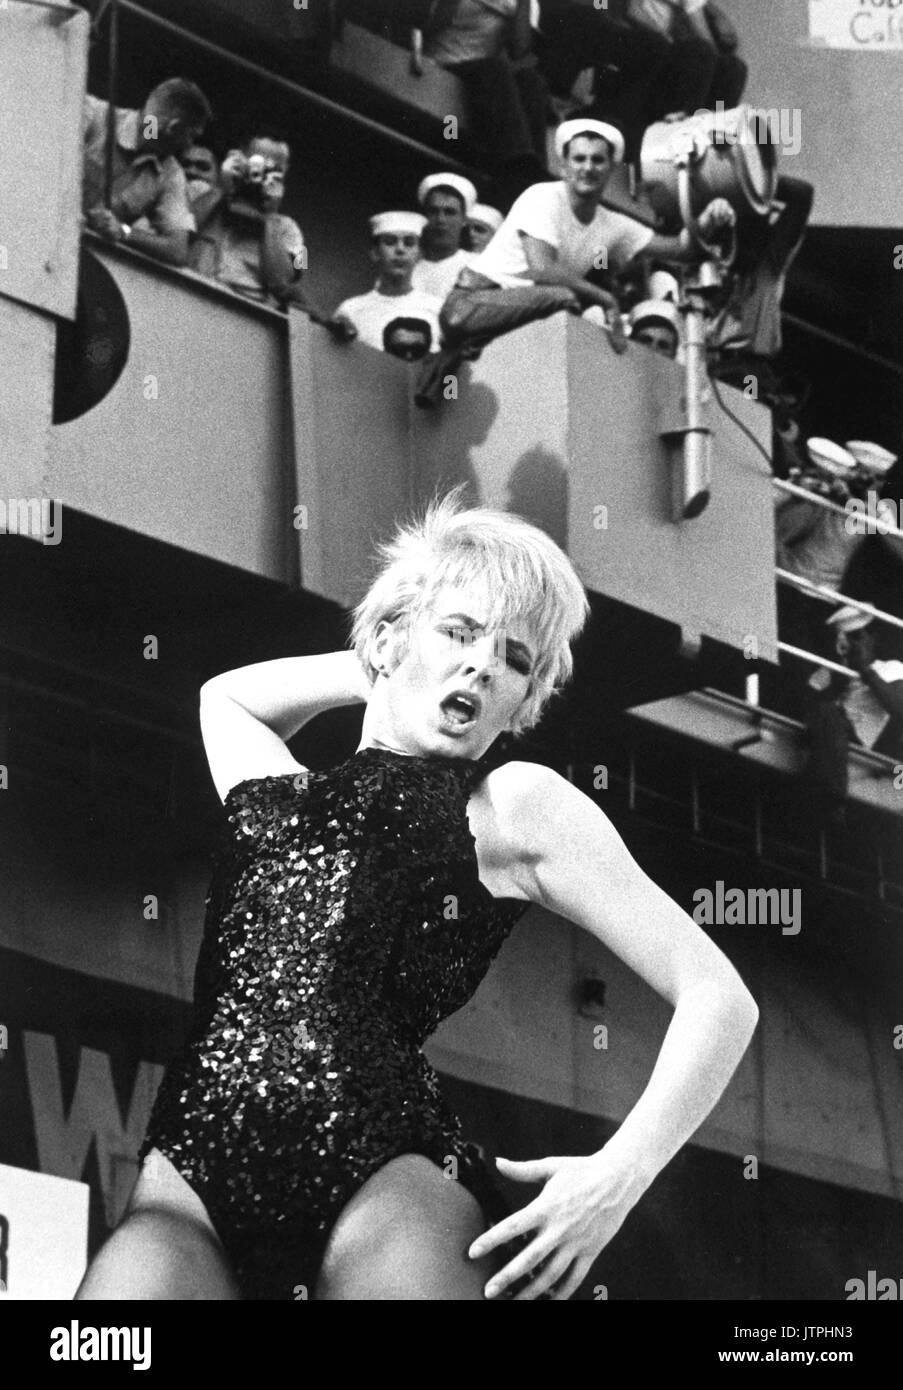 Watusi, Frug, Shimmy, Twist!  On a carrier? - It's swinging time on board Ticonderoga as Miss Joey Heatherton rocks out with a 'Tico Tiger' during the Bob Hope Show.  (USIA) NARA FILE #:  306-MVP-8-6 WAR & CONFLICT BOOK #:  391 Stock Photo